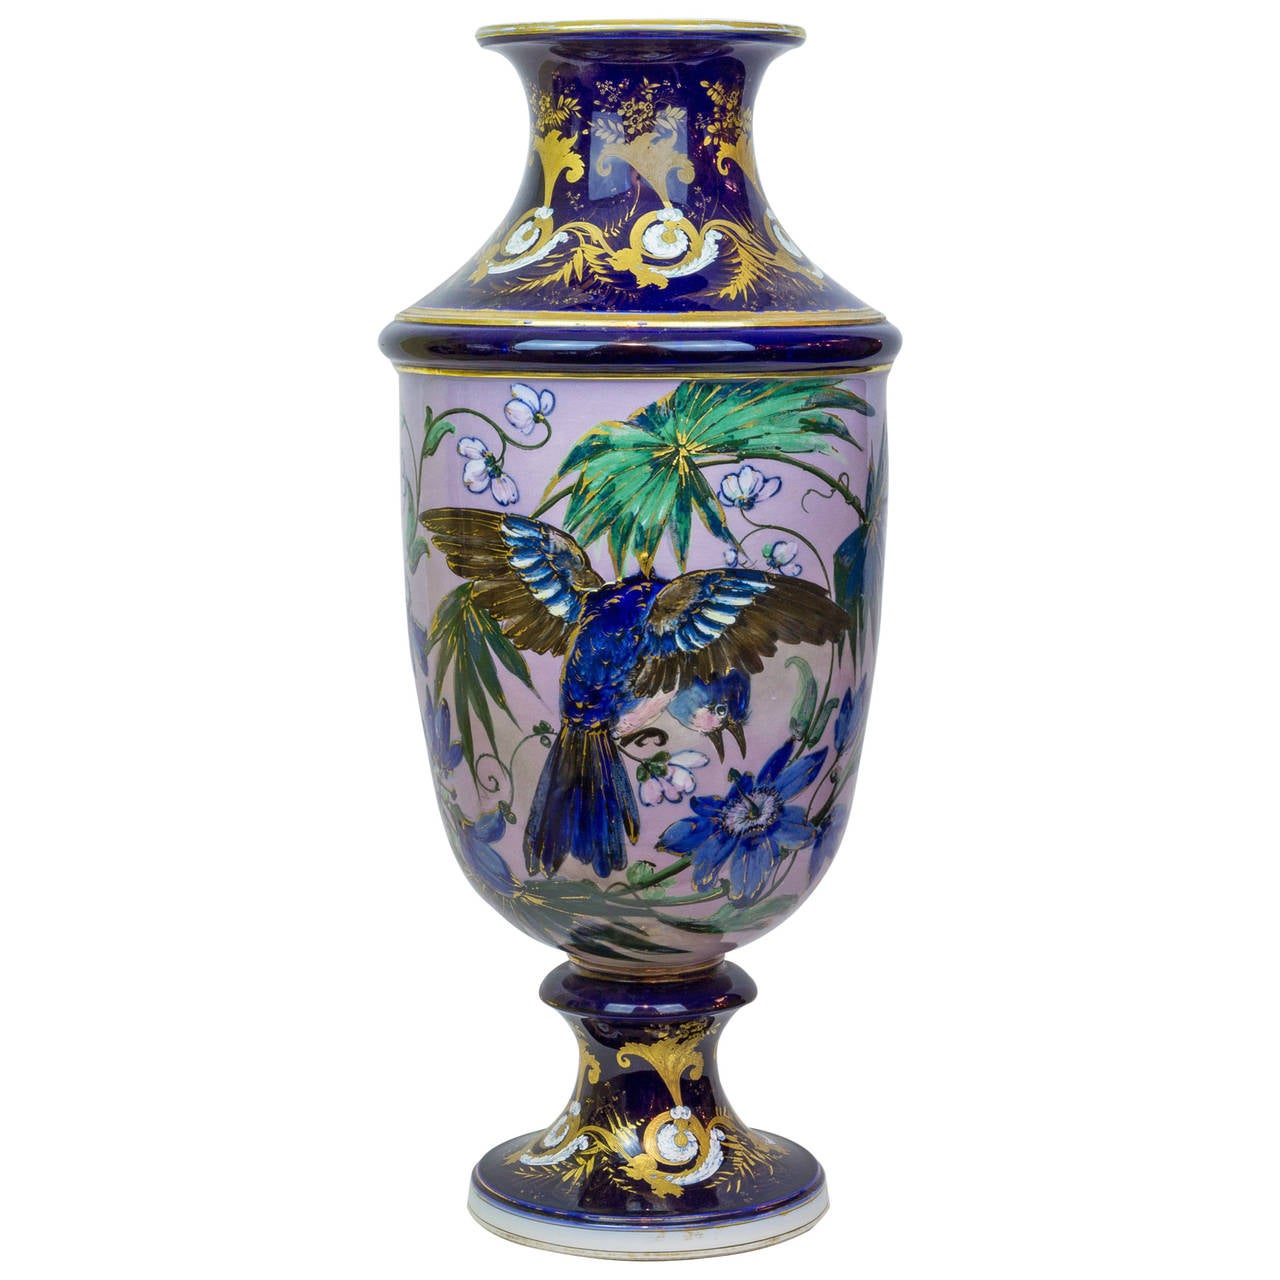 Large Aesthetic Porcelain Vase with Floral and Bird Decorations